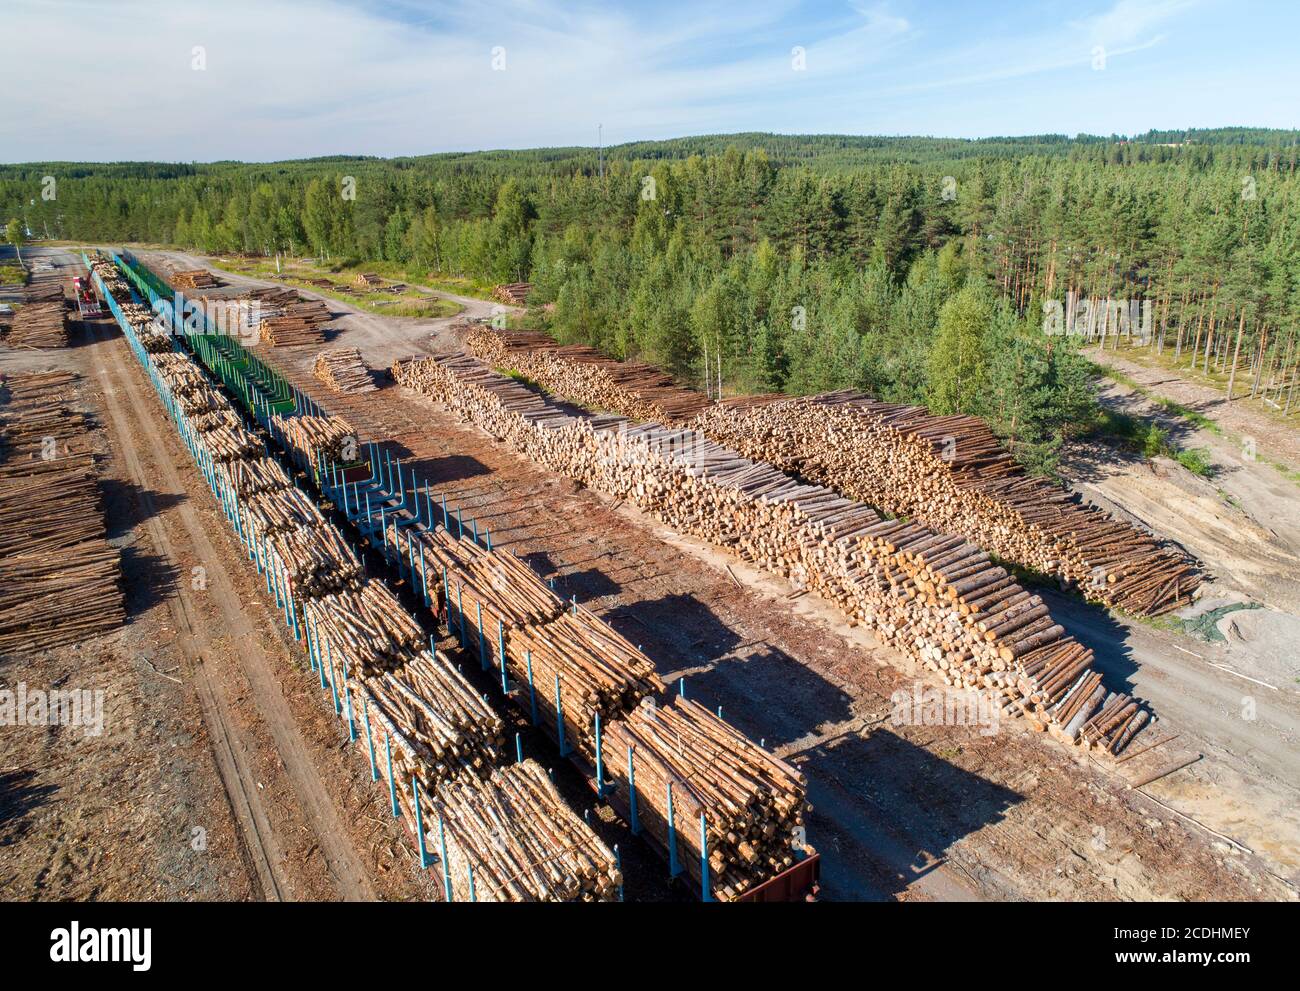 Aerial view of a railroad yard with log piles and train wagons loaded with timber for transport at Summer , Finland Stock Photo